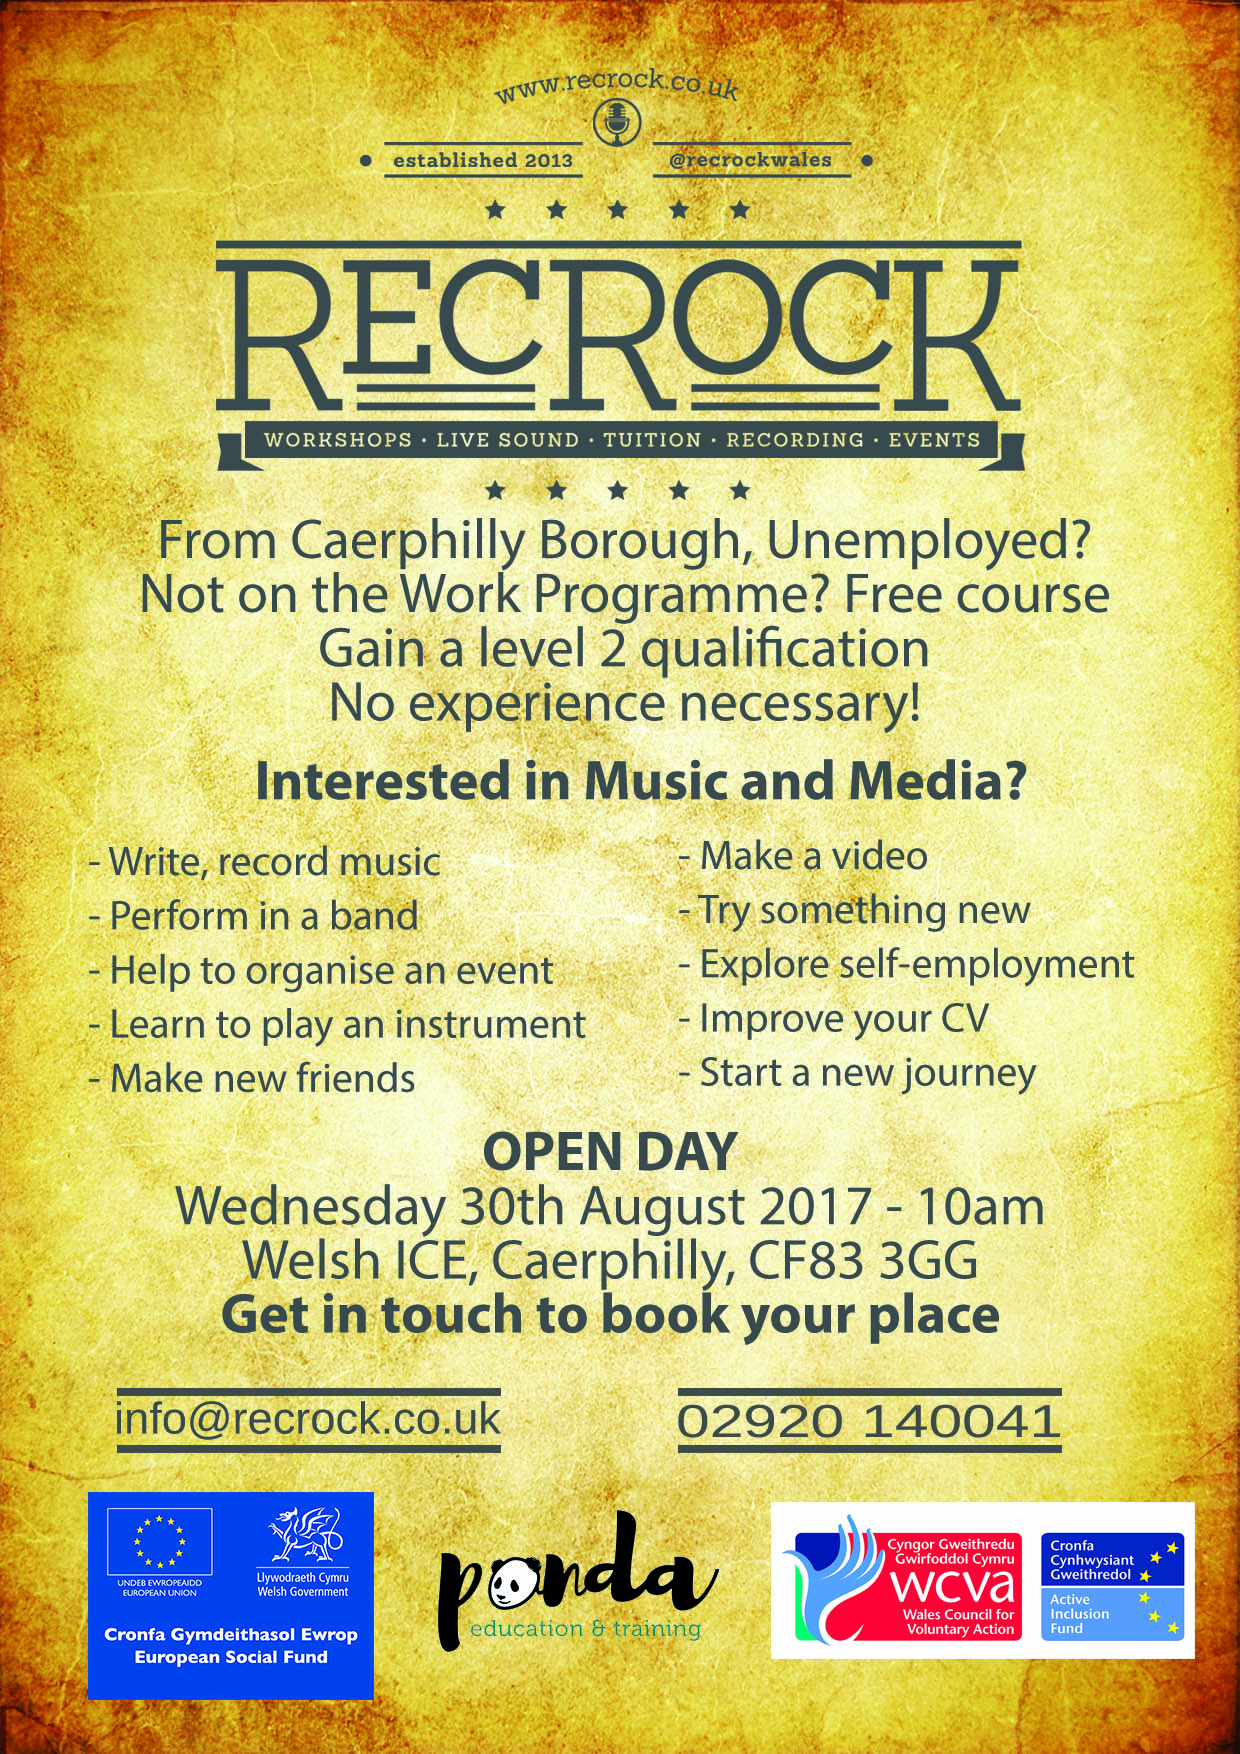 RecRock open day, 30th August 2017 - 10am - Book your place